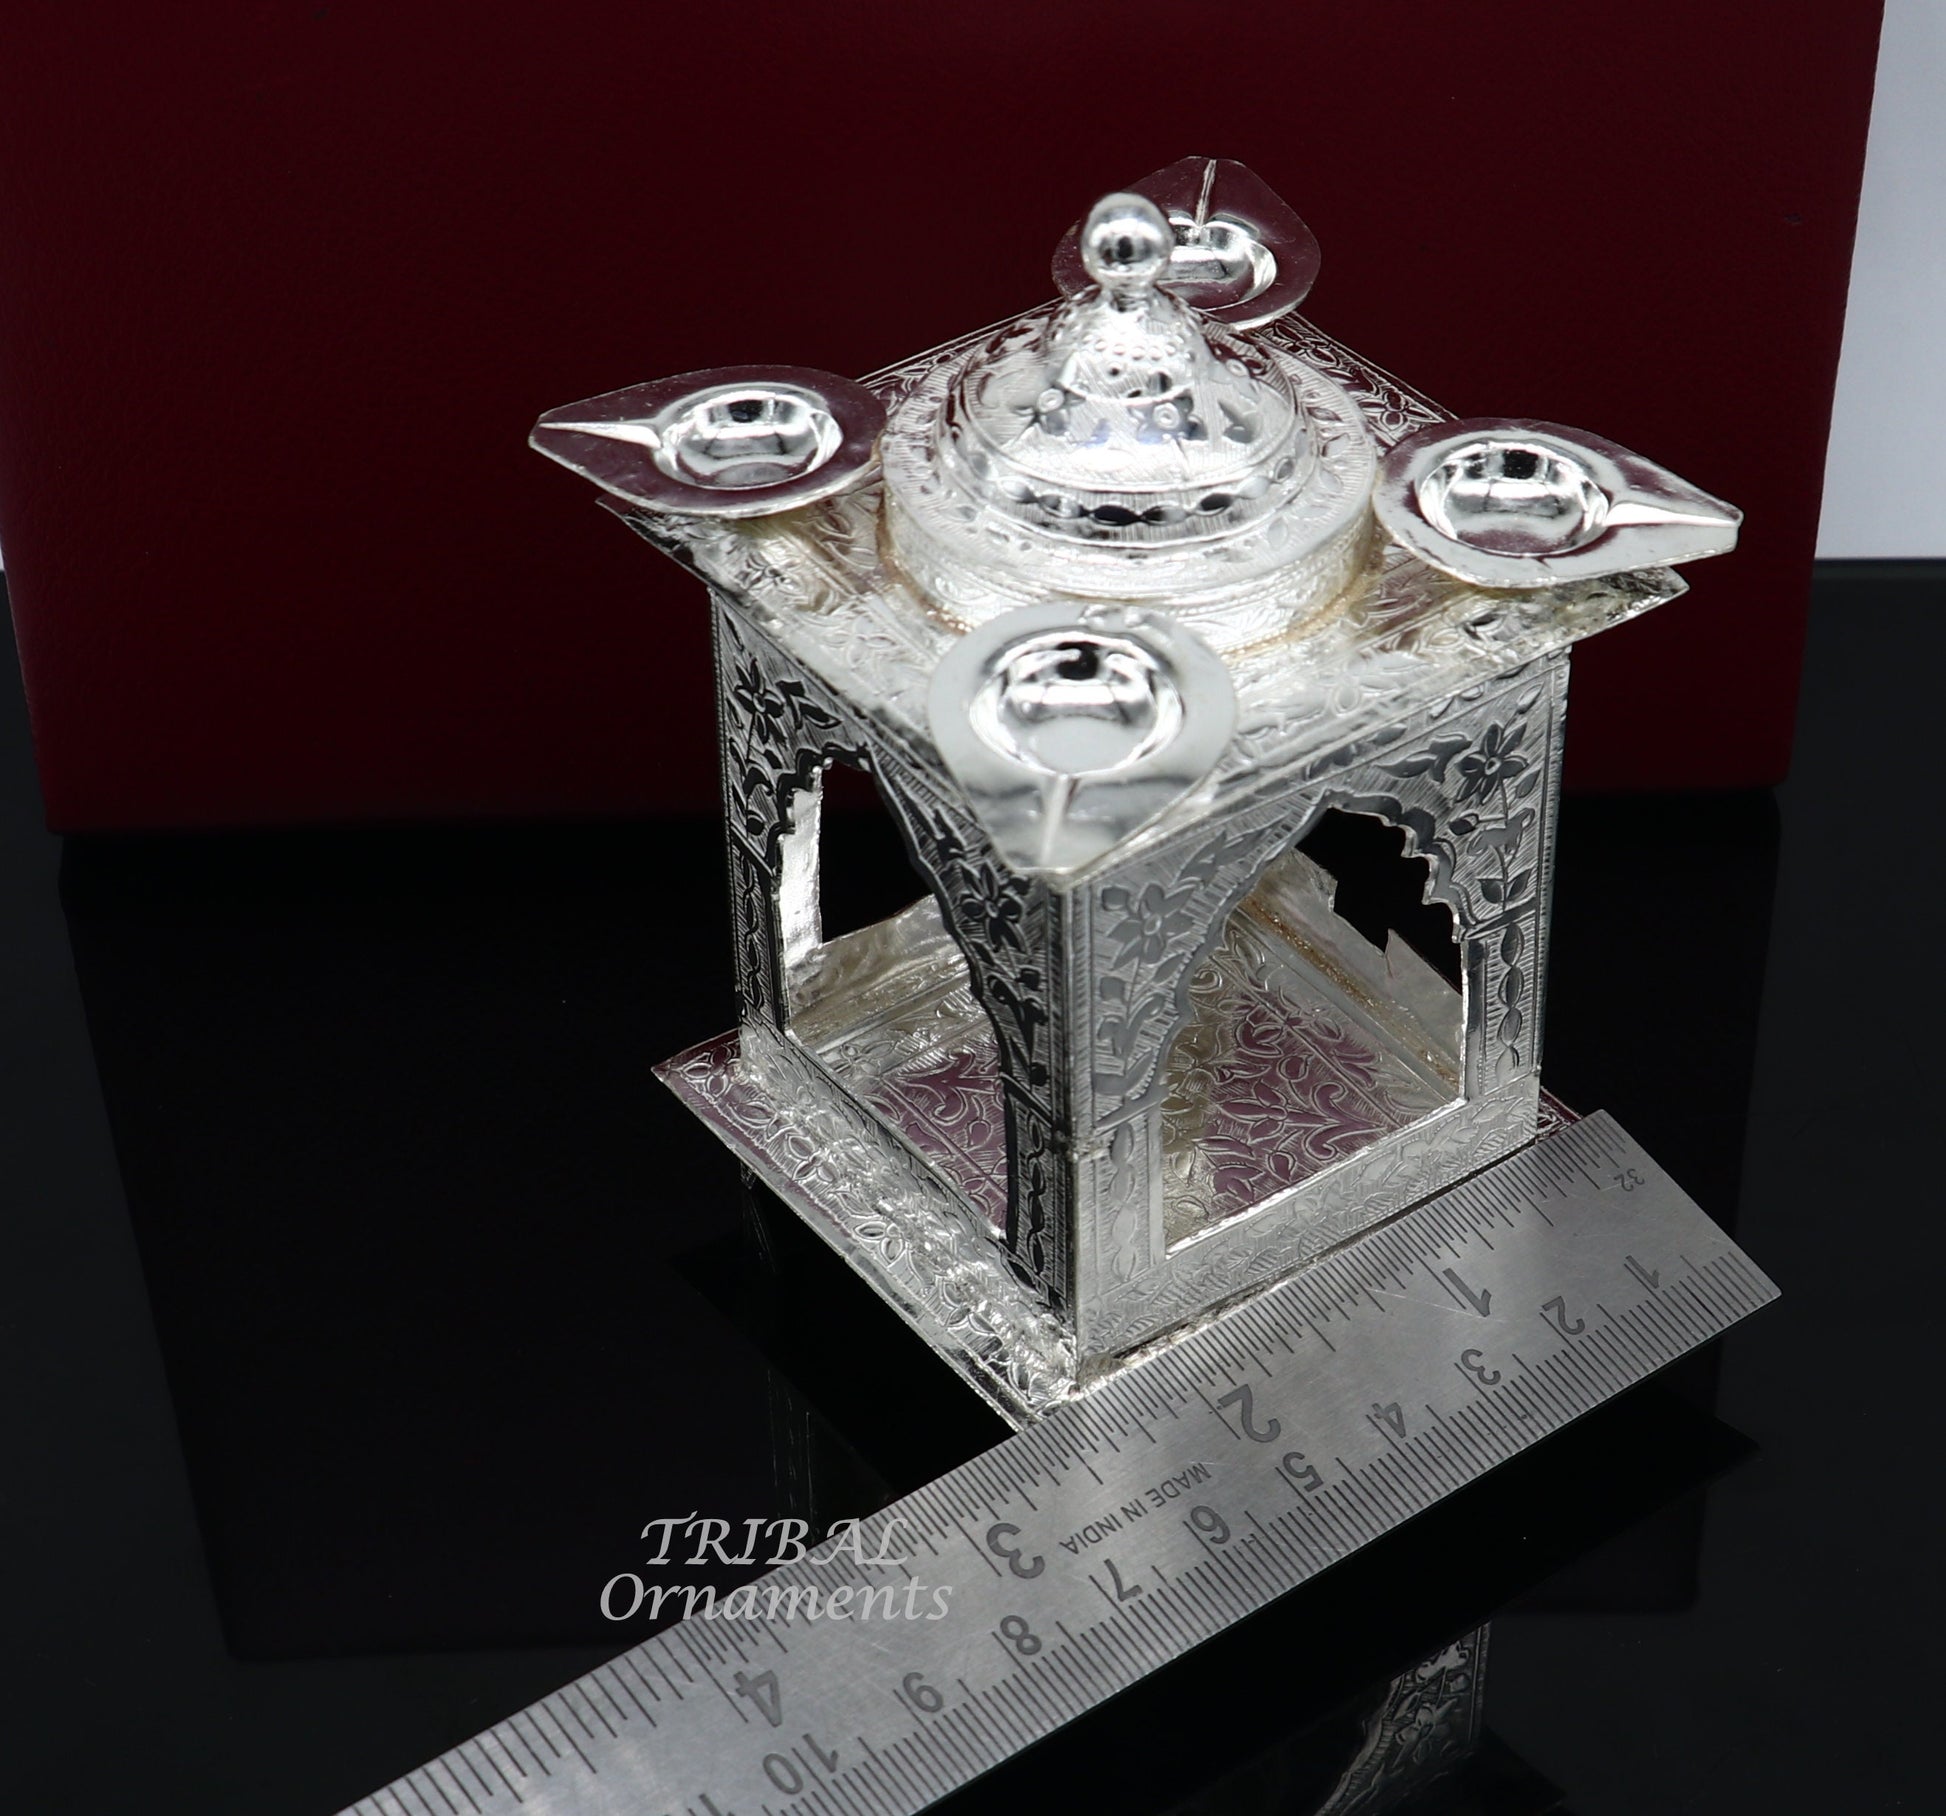 925 sterling silver handmade vintage design chattri temple lamp best puja article with 4 lamp on it, best home temple decor utensils su810 - TRIBAL ORNAMENTS